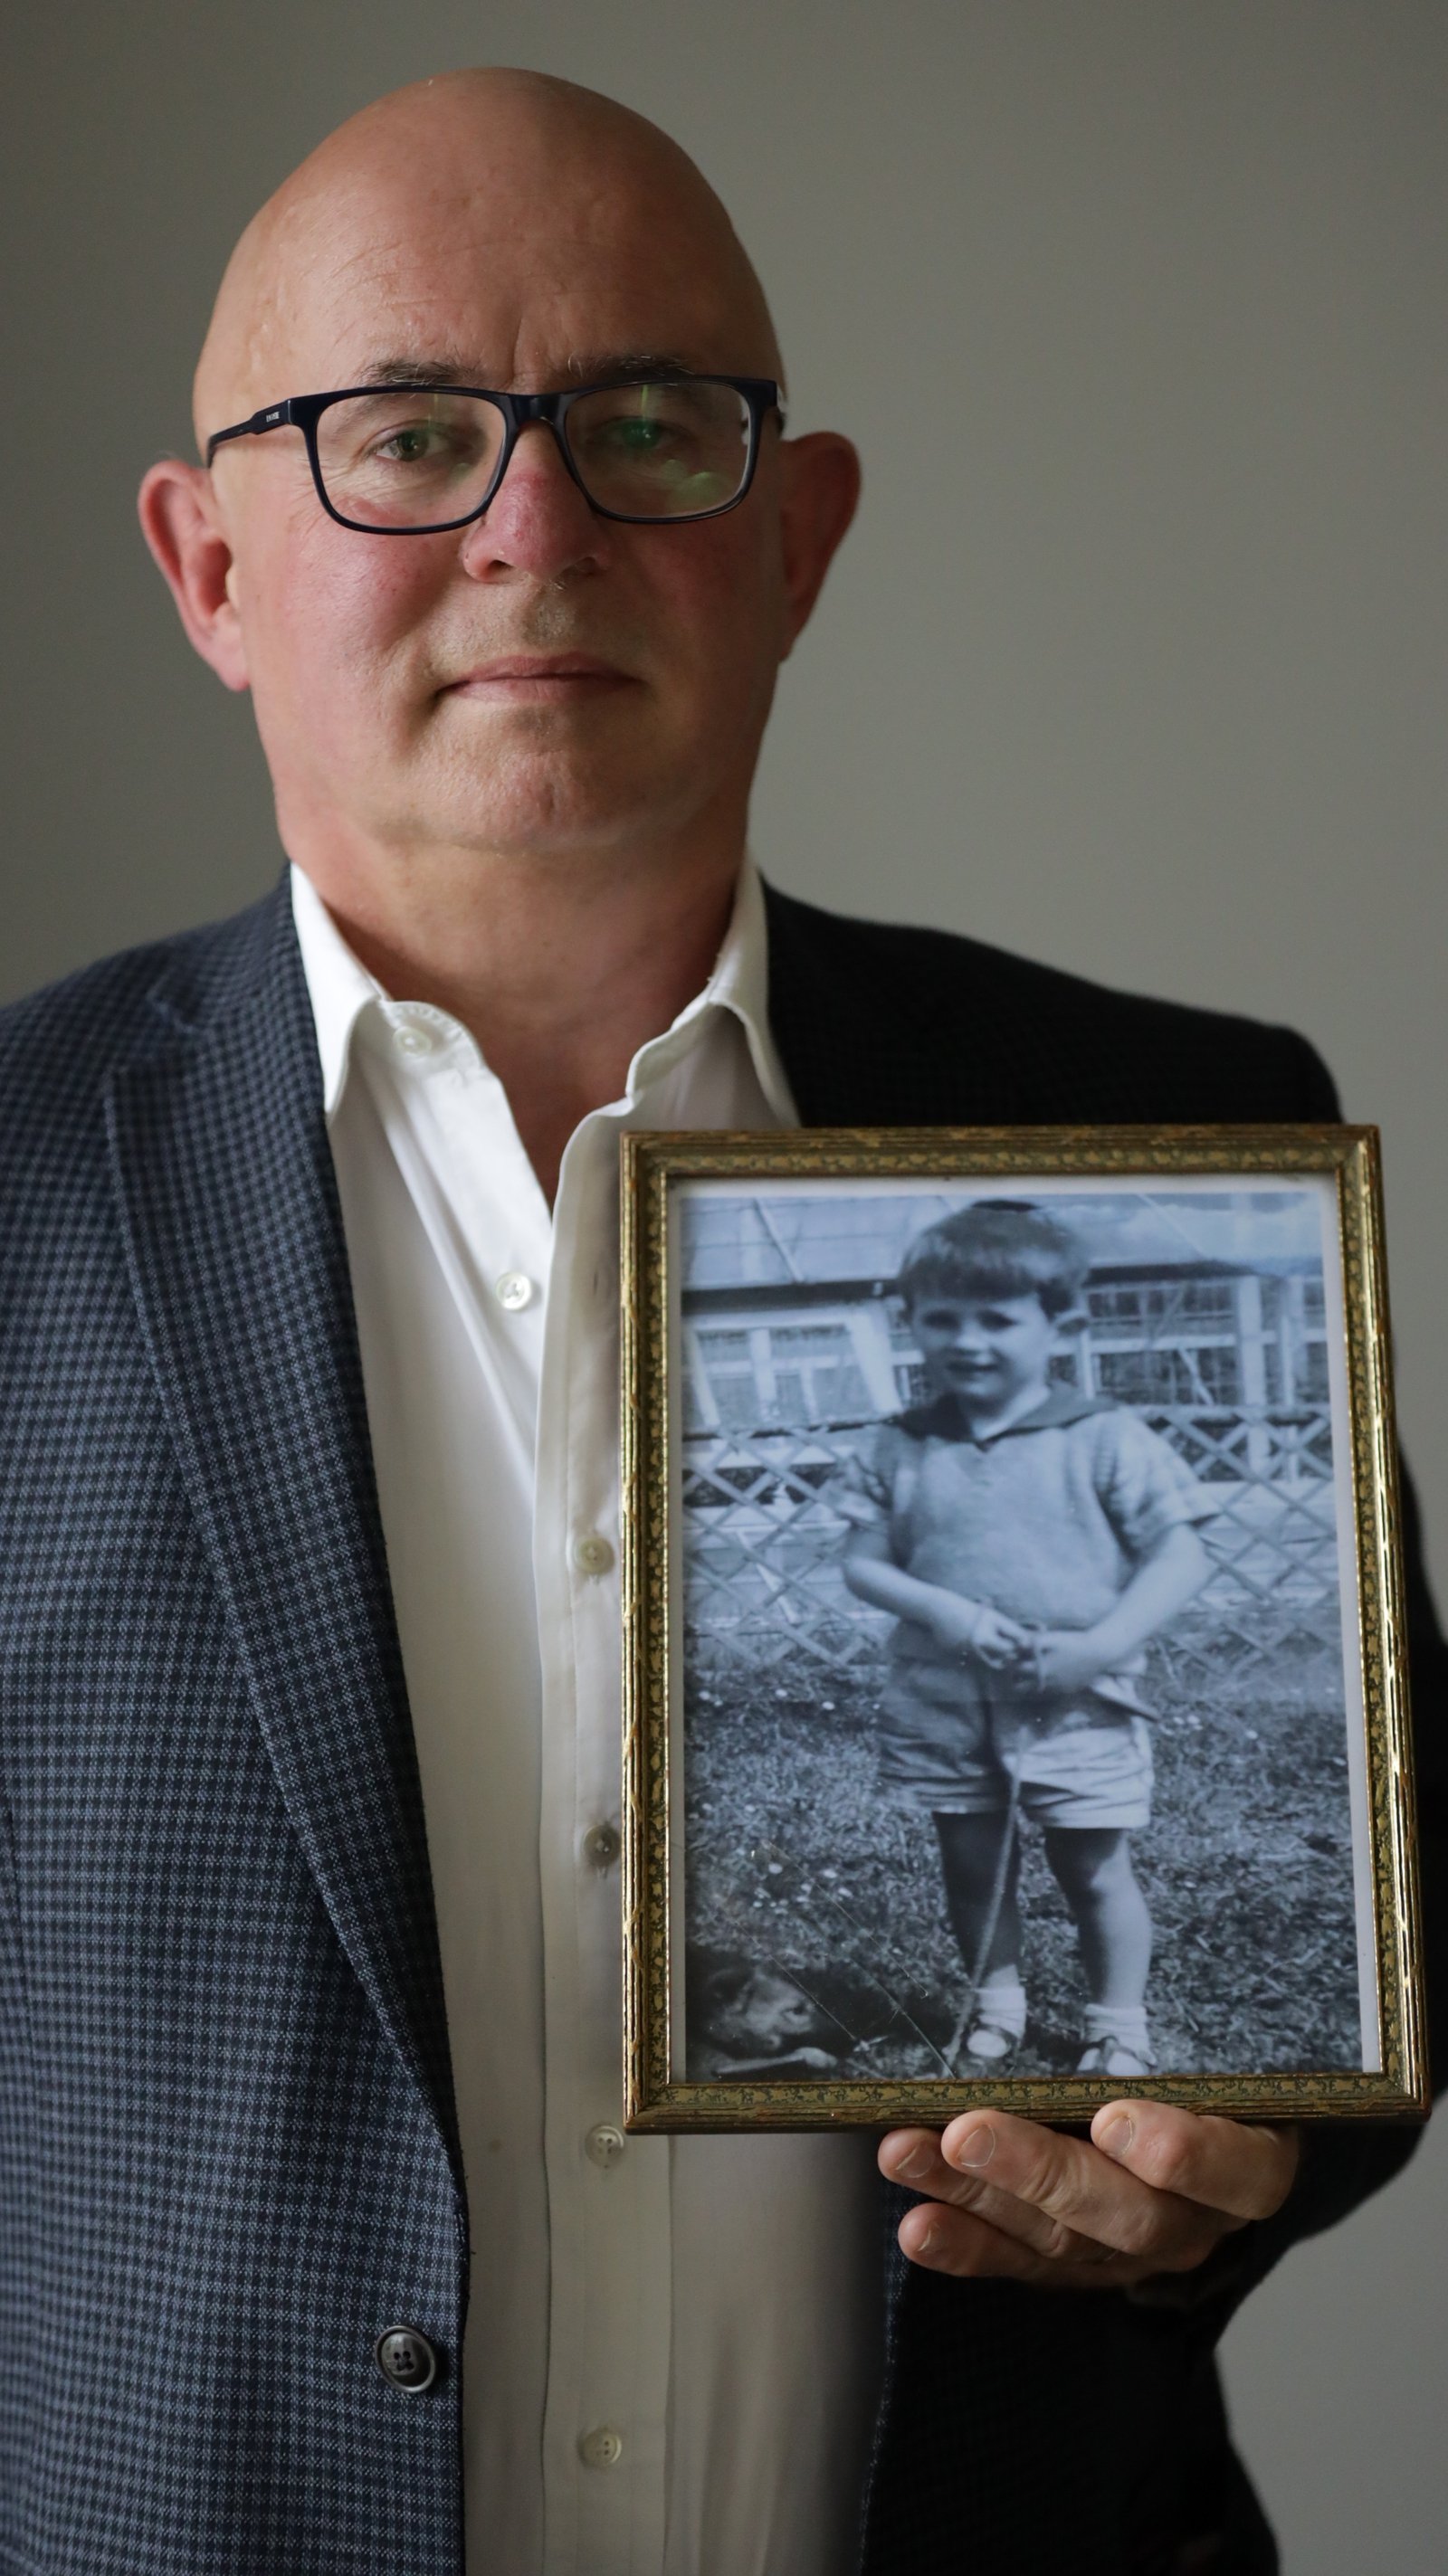 Image - Brian Lynch went through most of his life unaware he was not the biological son of his adoptive parents